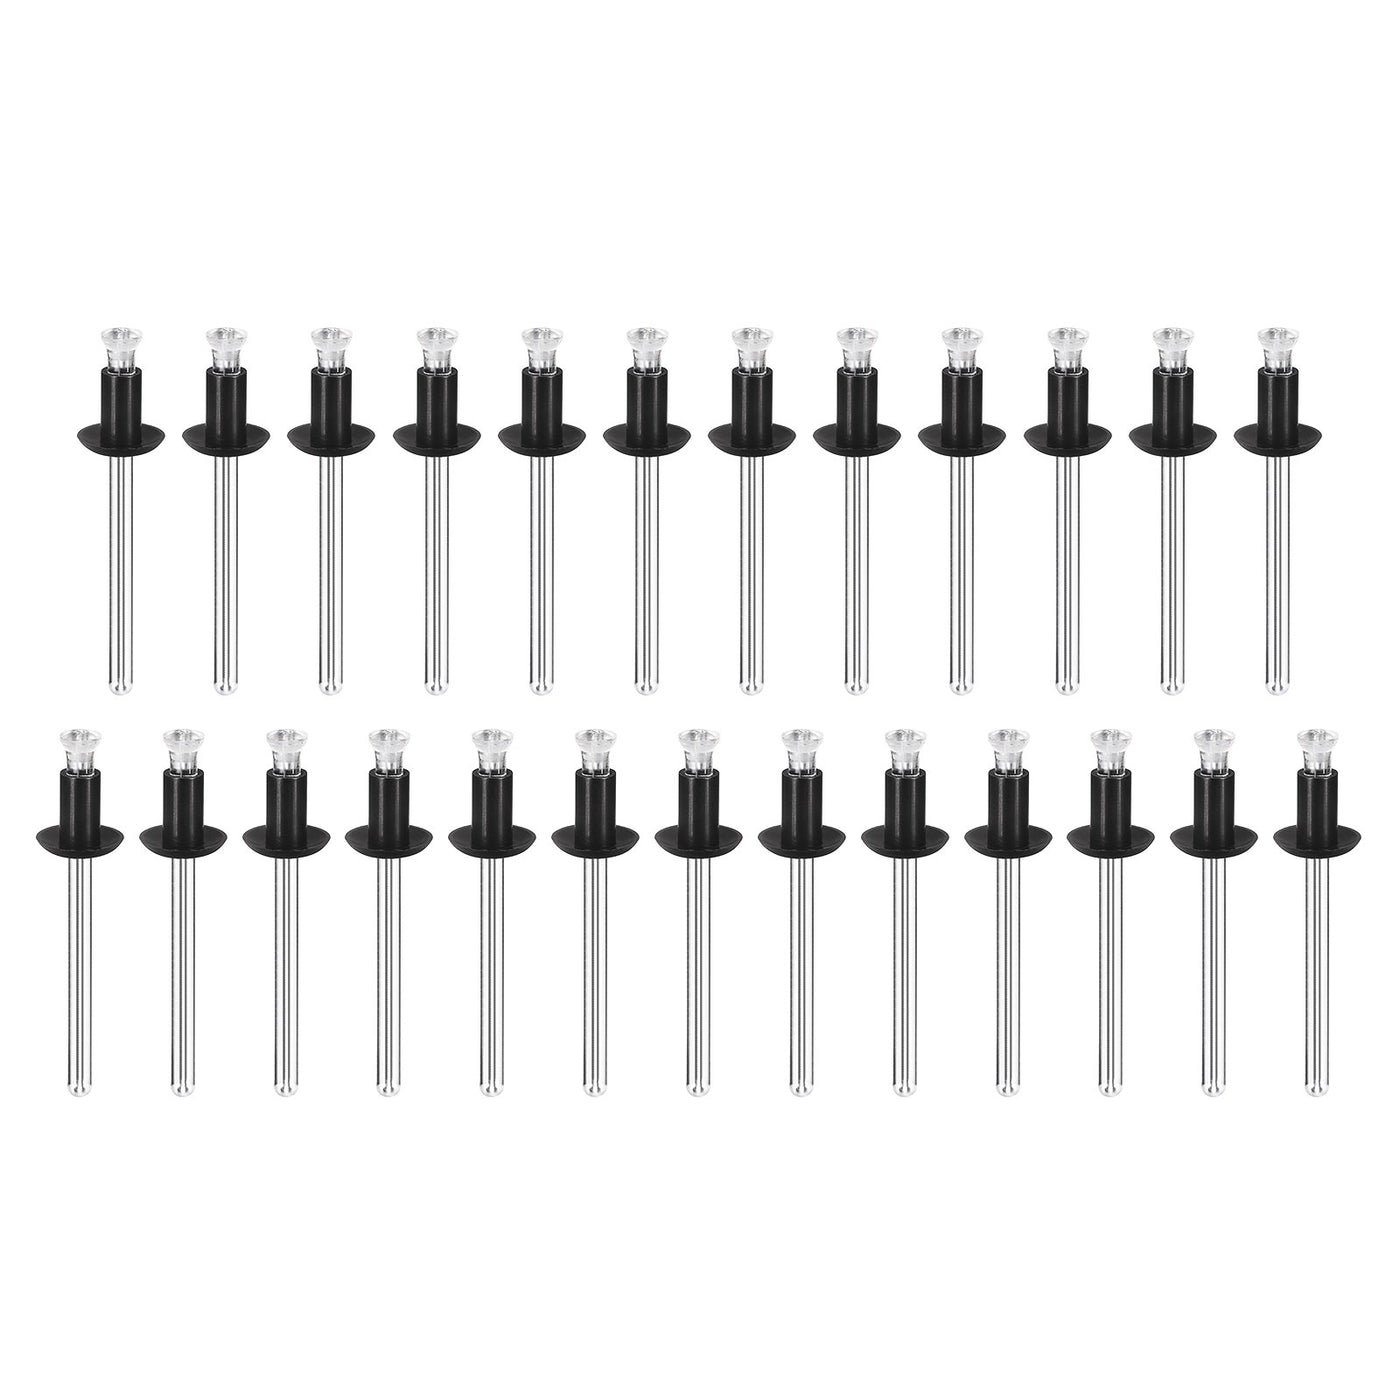 uxcell Uxcell 5.6mm x 9.6mm Nylon Blind Rivets for PC Board Bumper Trim Retainer, Black 25Pcs